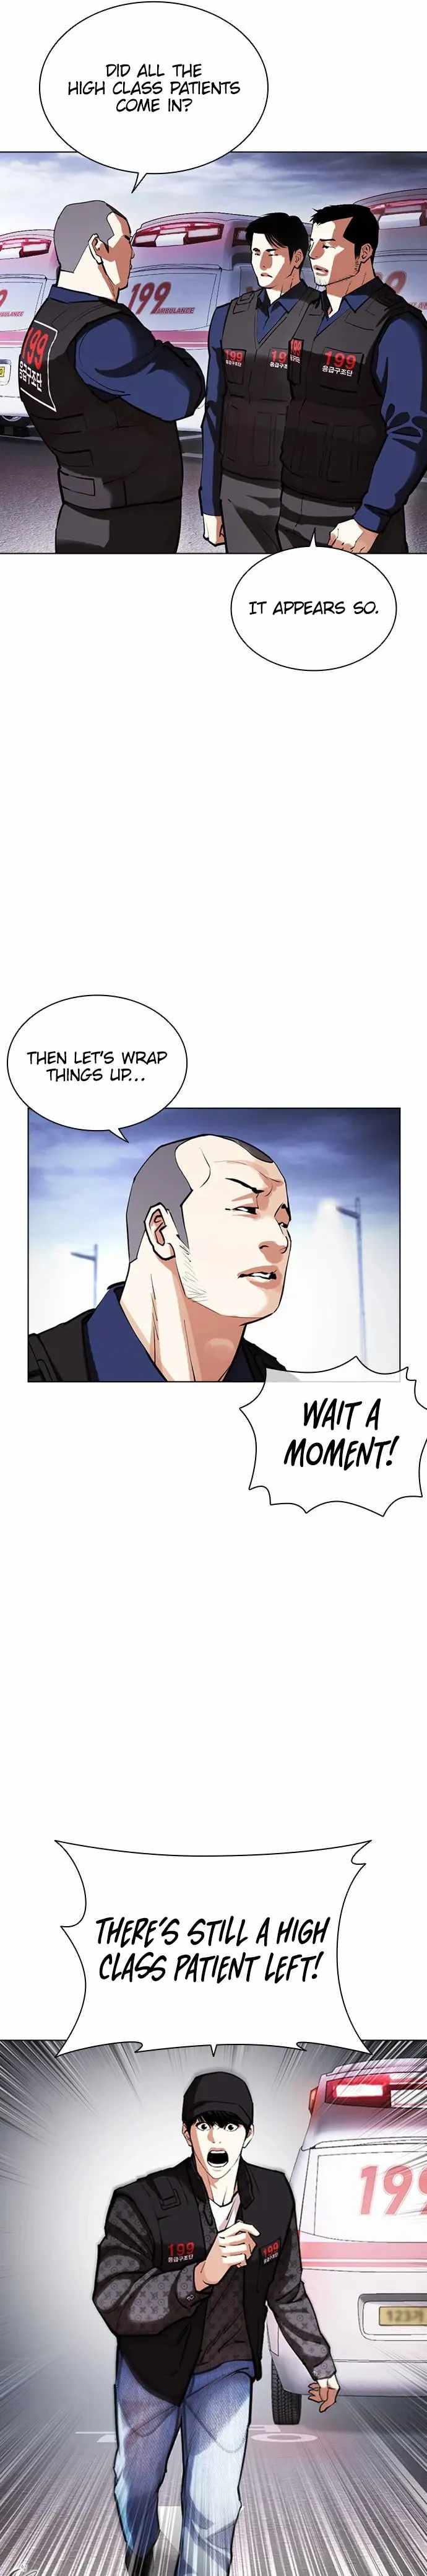 Lookism Chapter 450 image 33